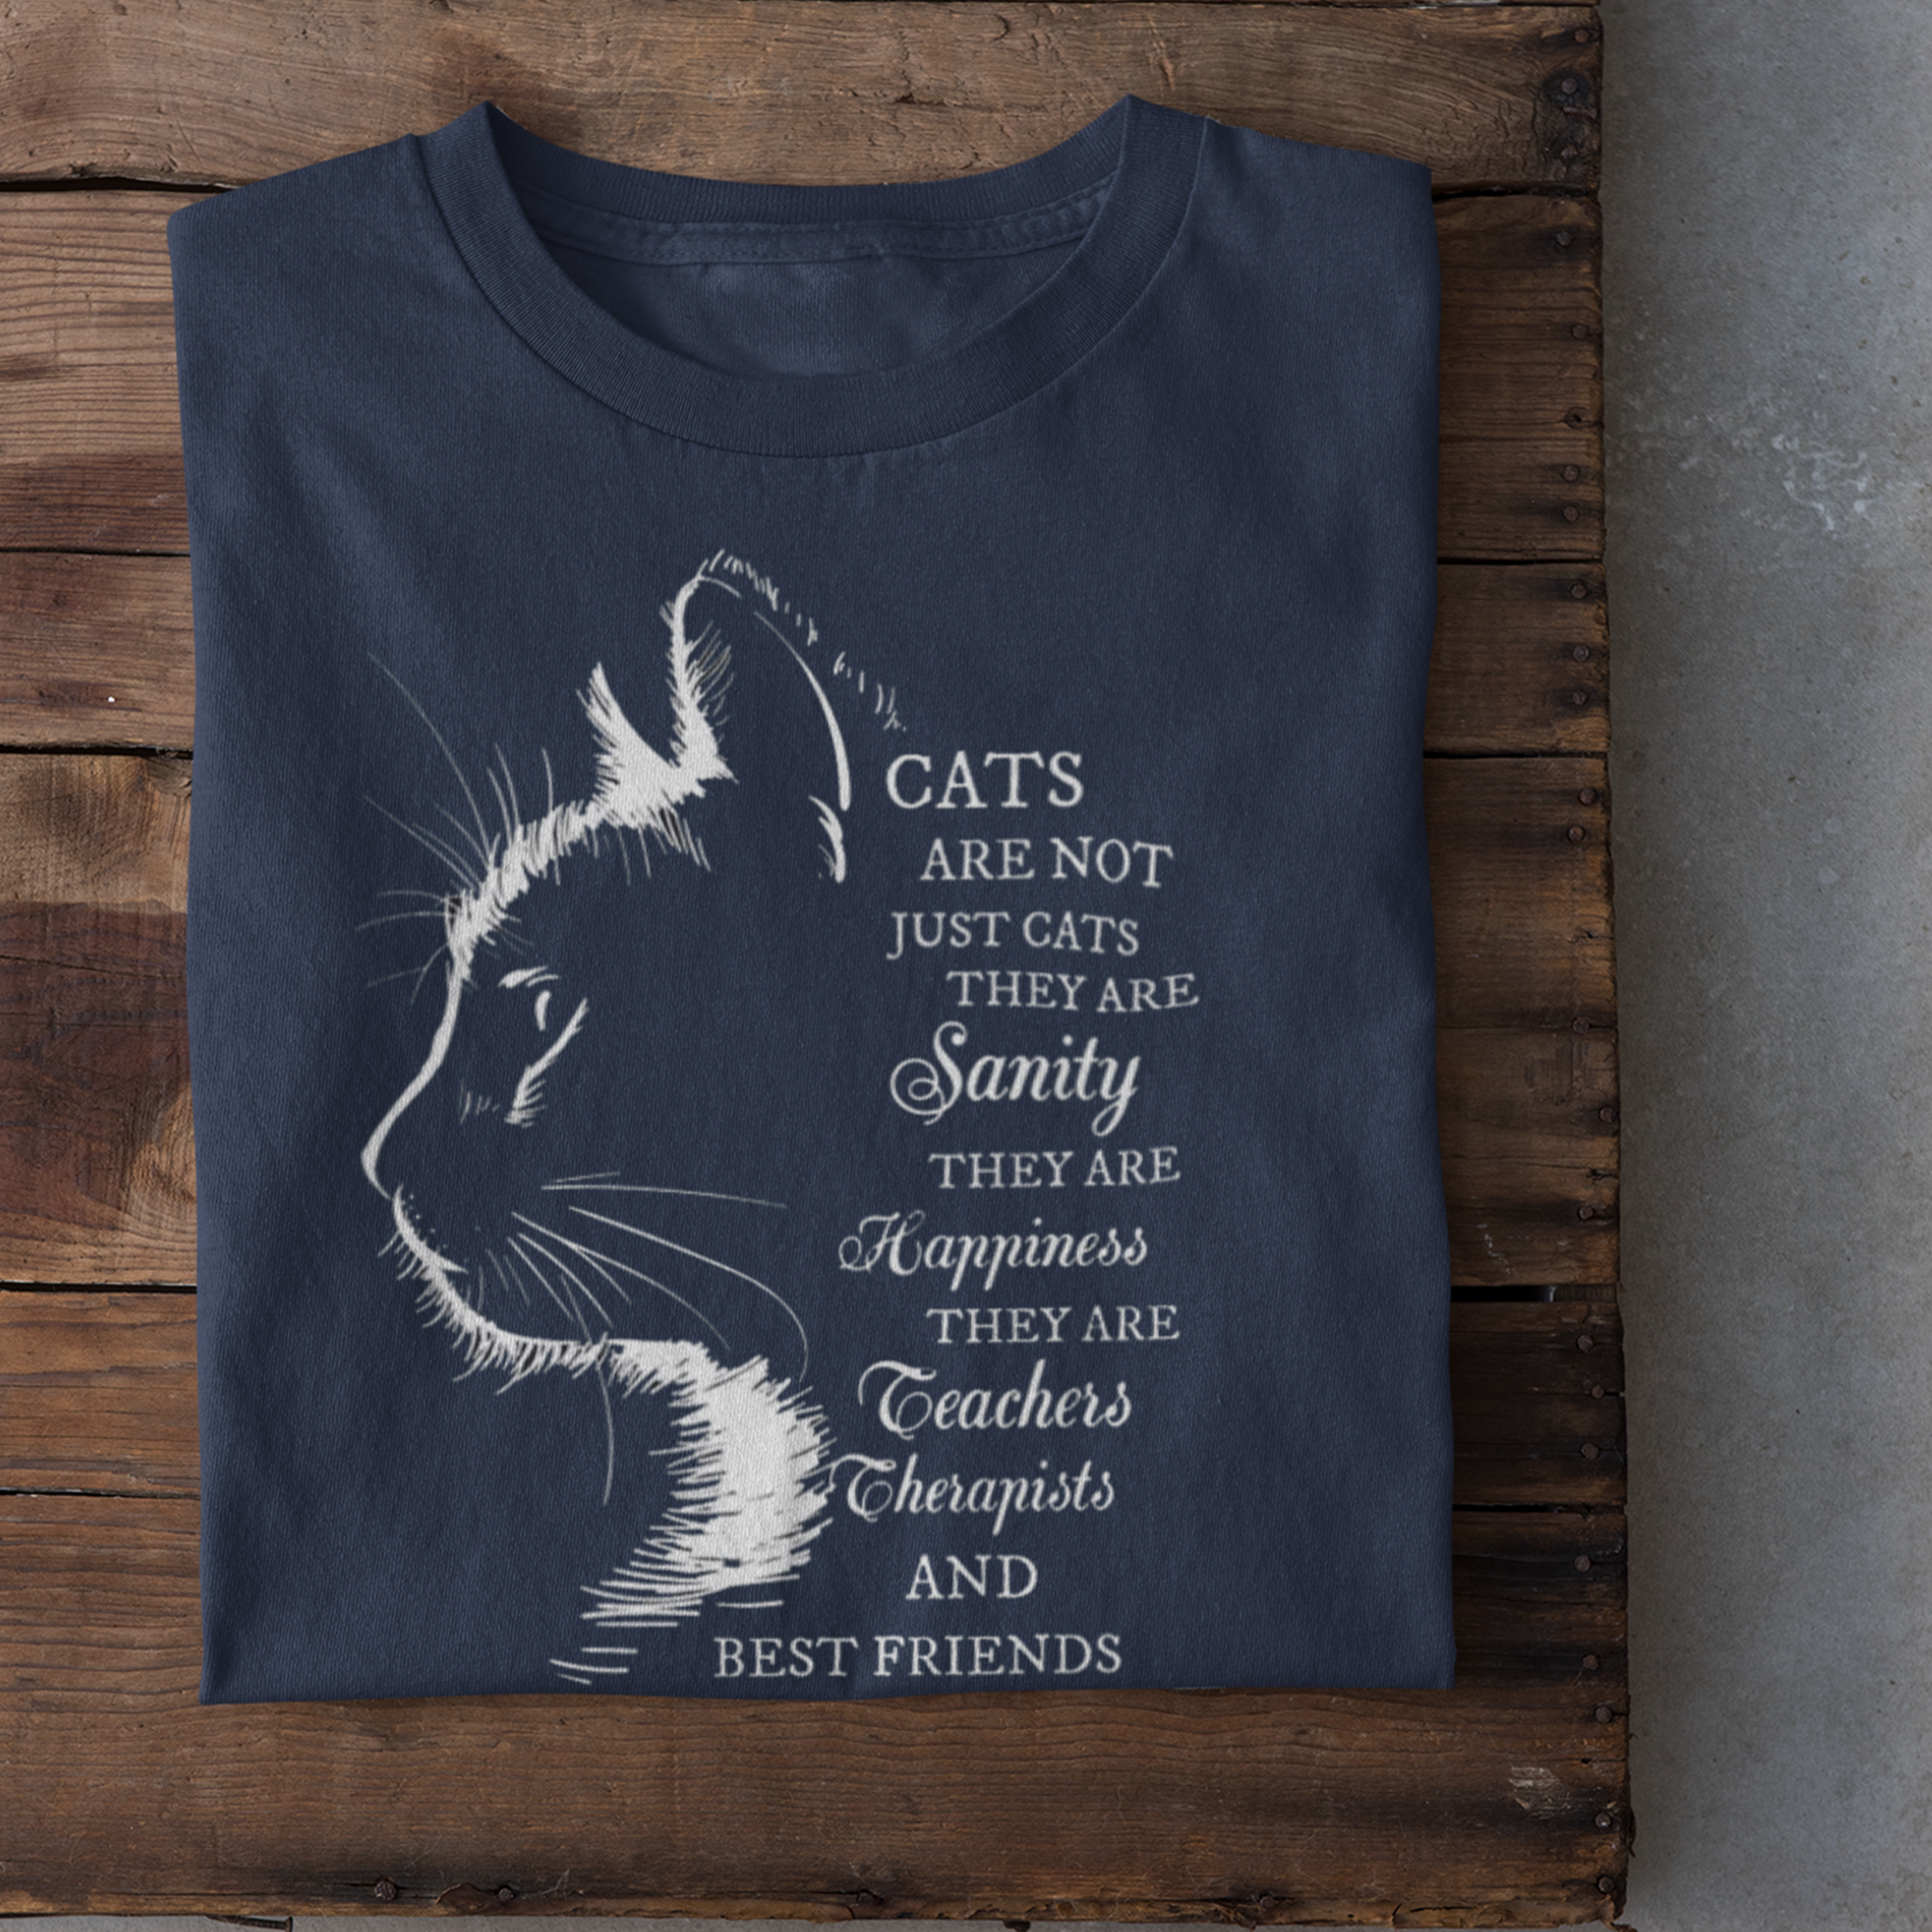 You Are Not Just Cats Shirt, Cat Lover Shirt, Gift For Cat Lover - Personalized T-shirt